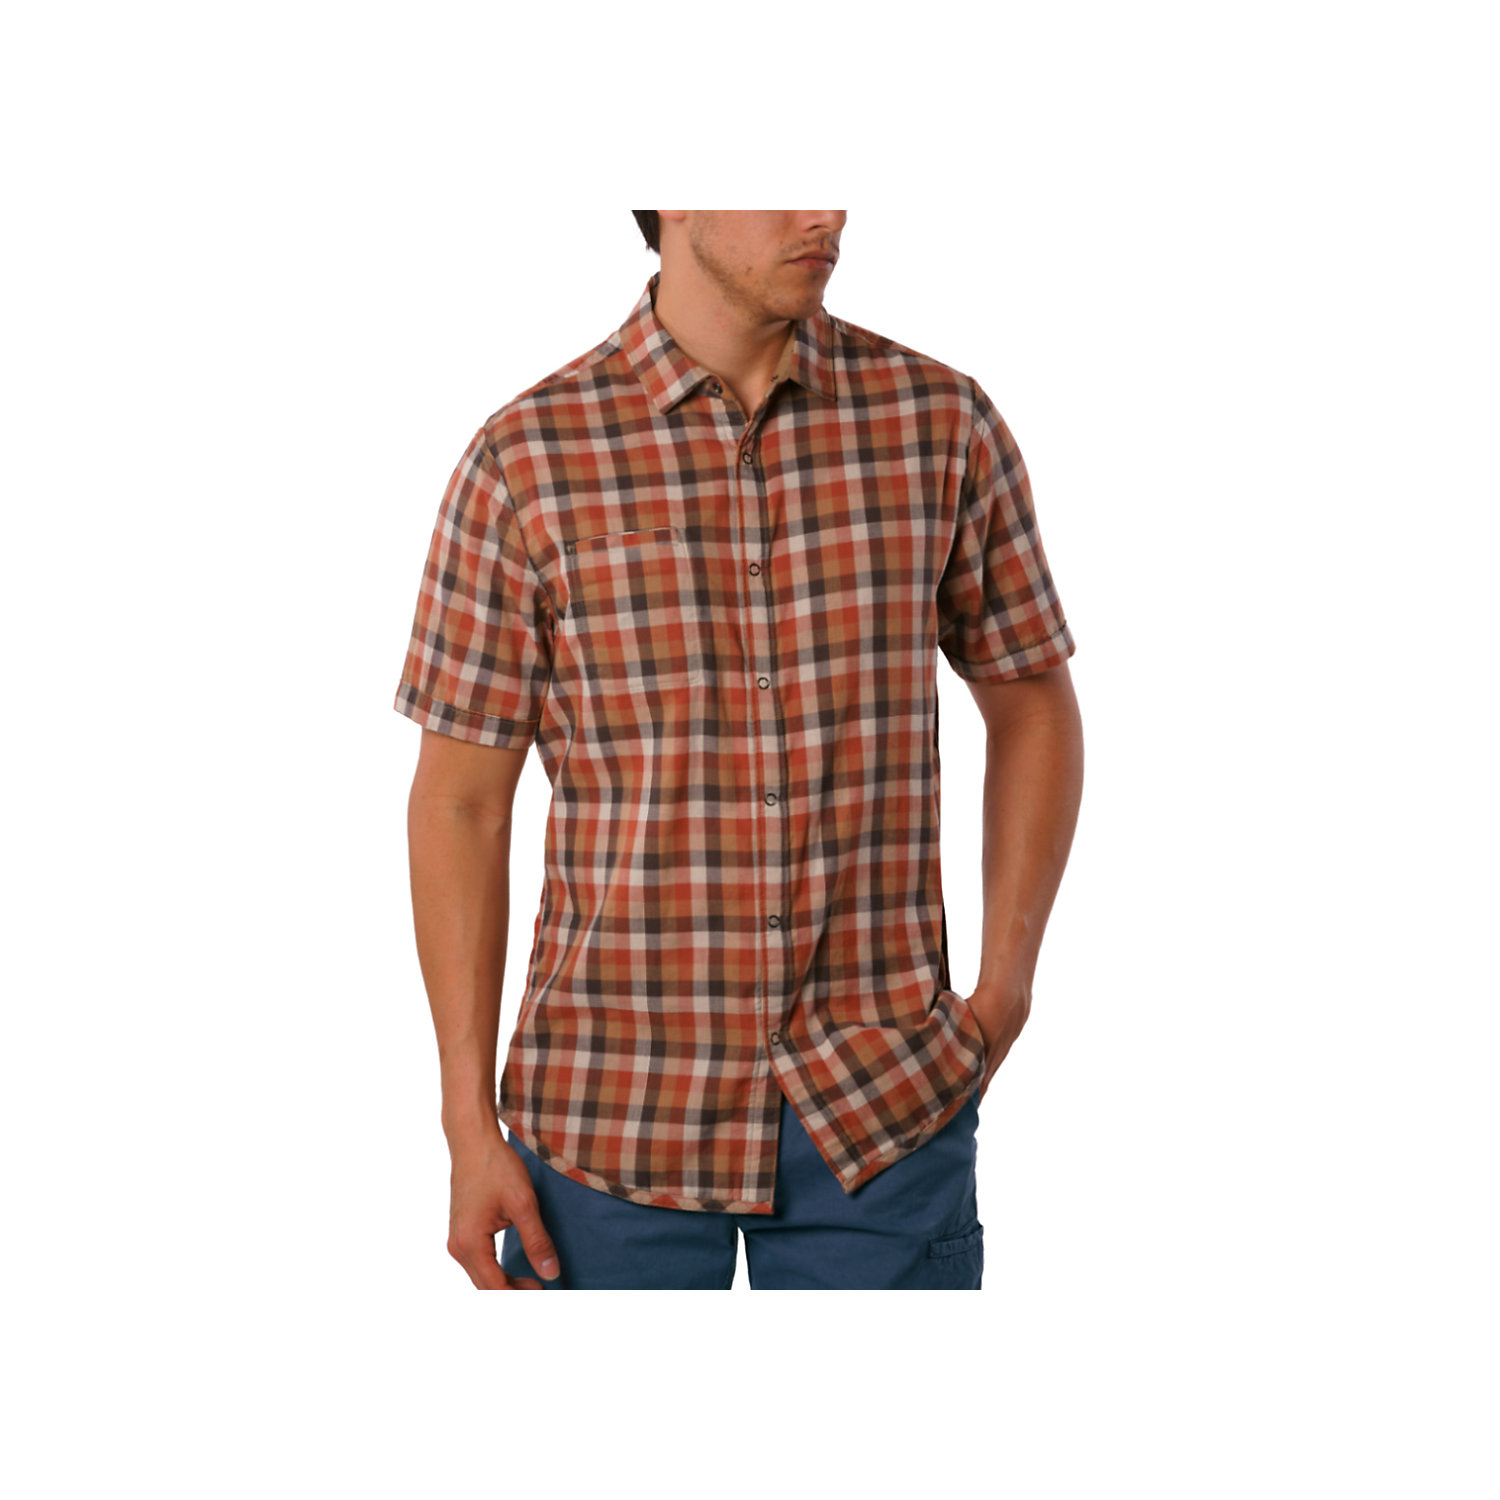 Jeremiah Mens Nomad Reversible Plaid with Print SS Shirt